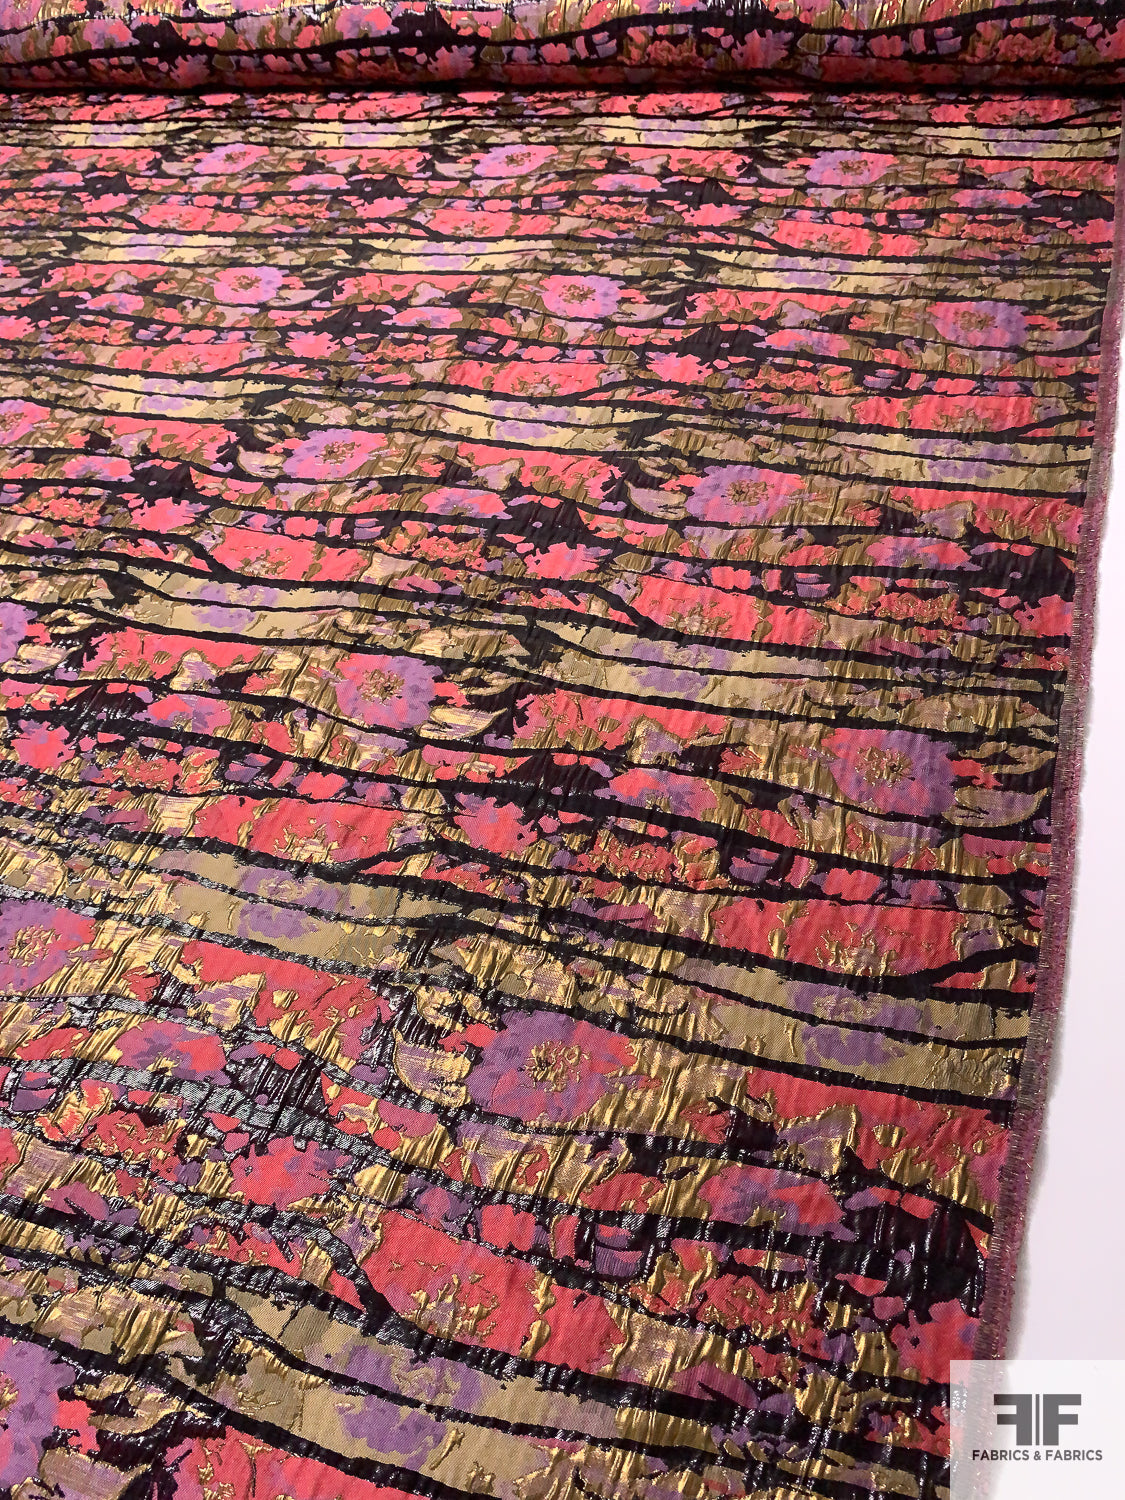 Abstract Textured and Glossy Metallic Brocade - Pink Melon / Lavender / Gold / Black